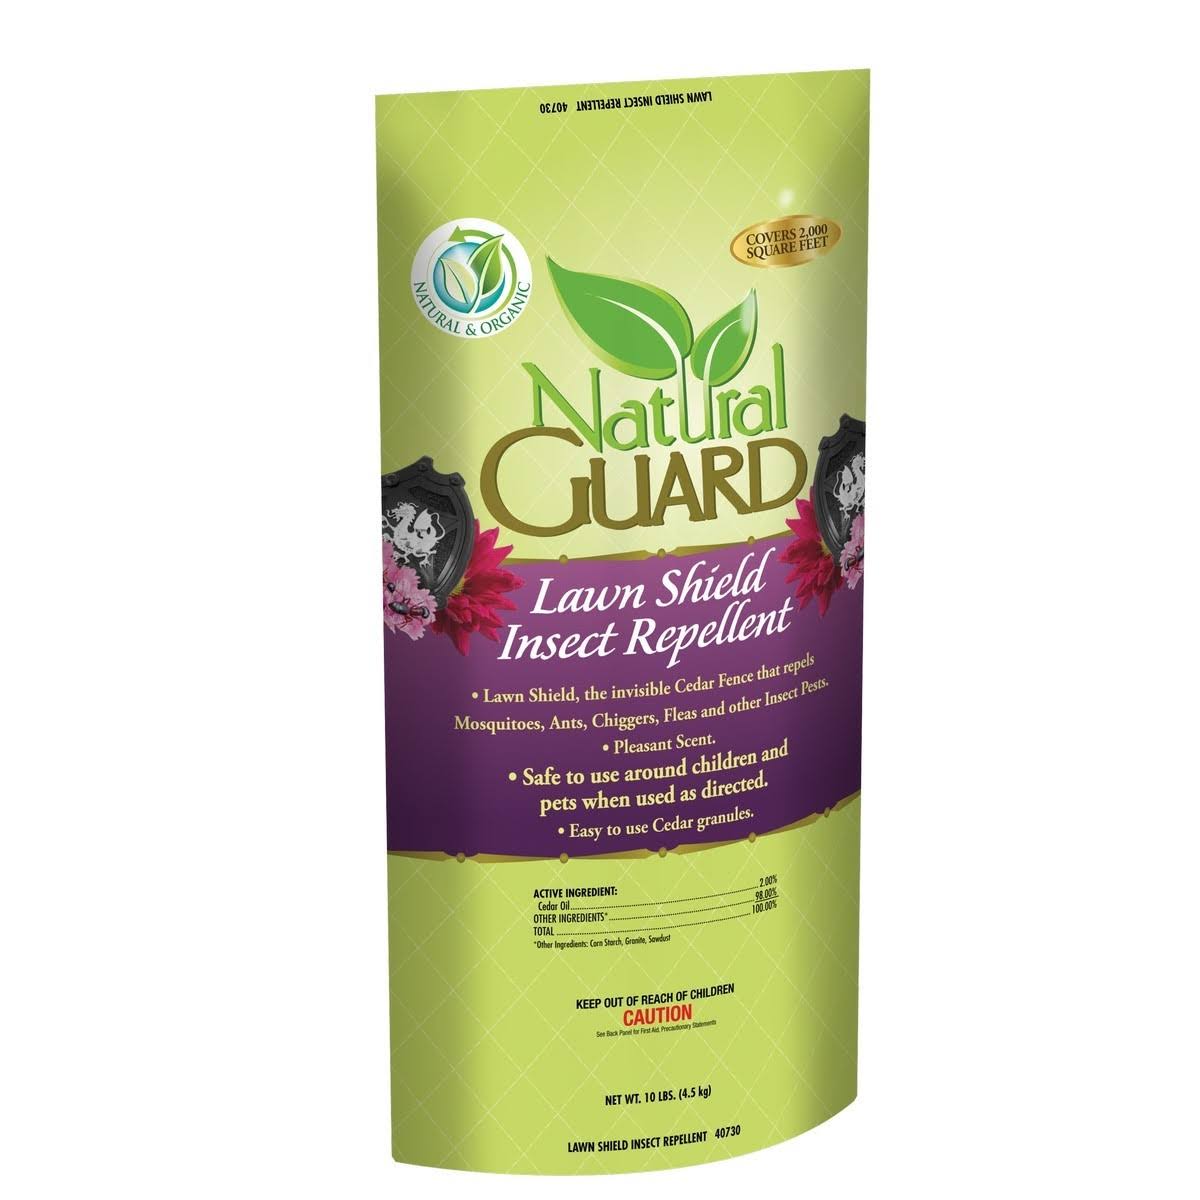 Natural Guard Lawn Shield Insect Repellent - 10lbs